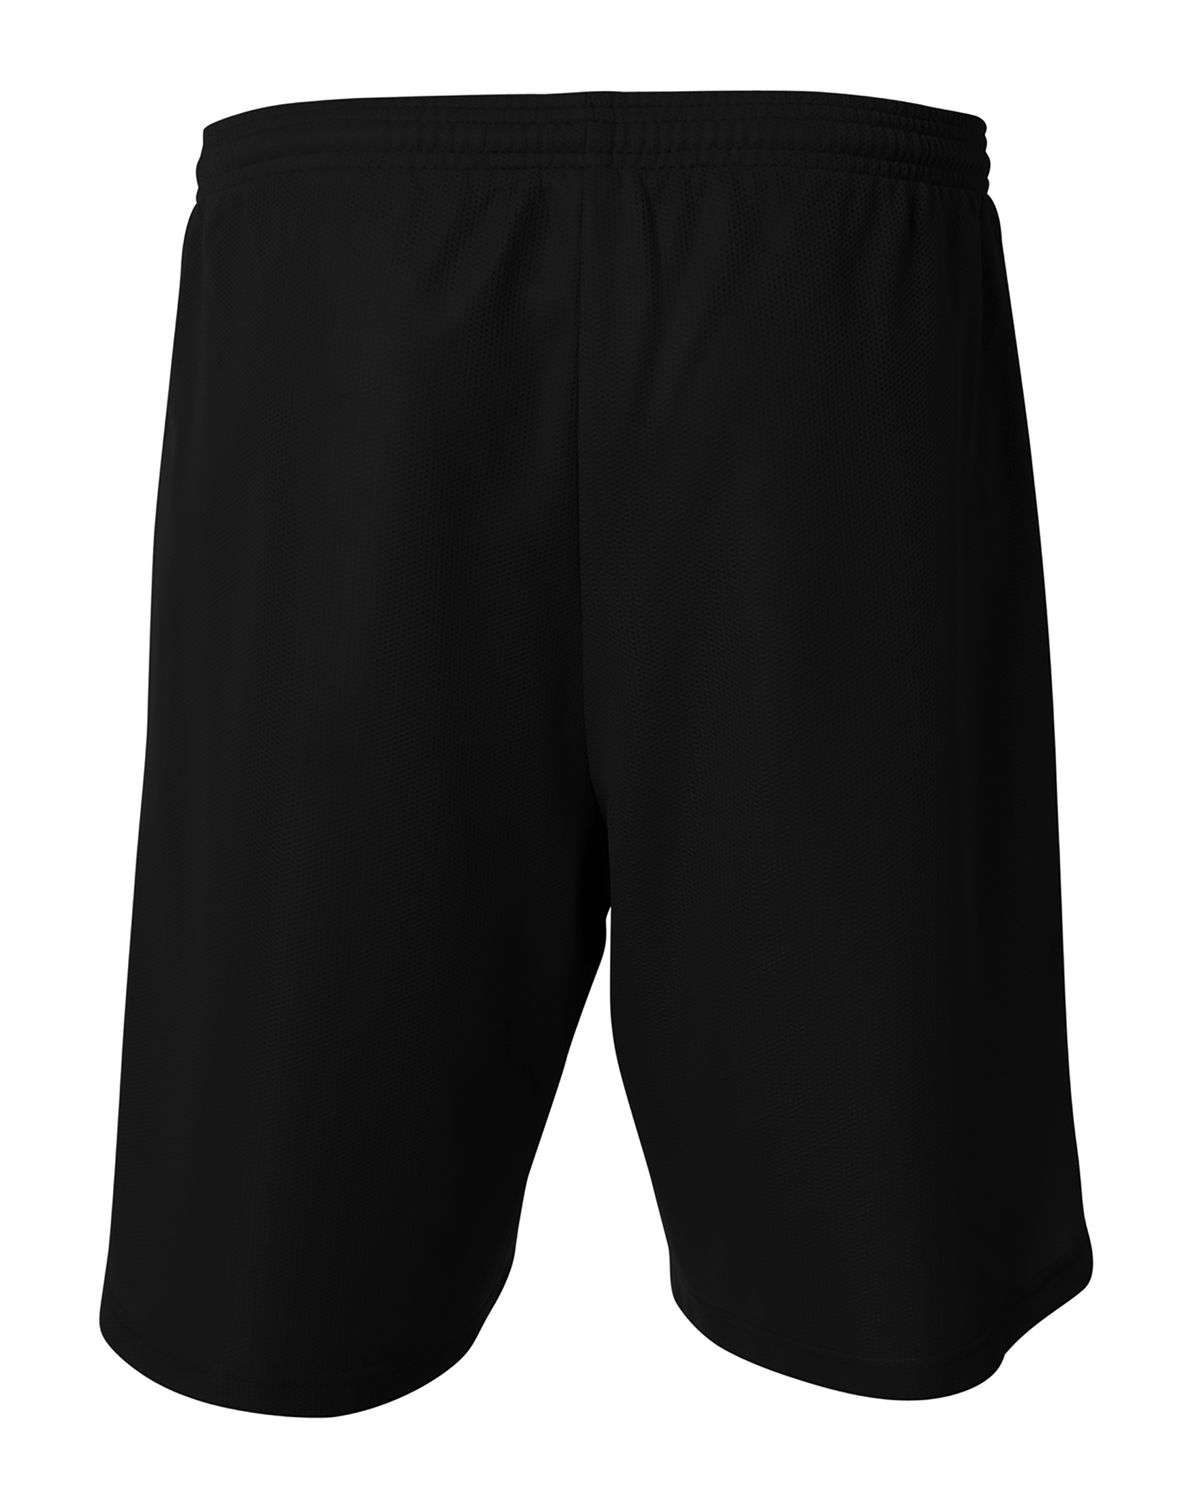 'A4 NB5184 Youth Lined Micro Mesh Short'